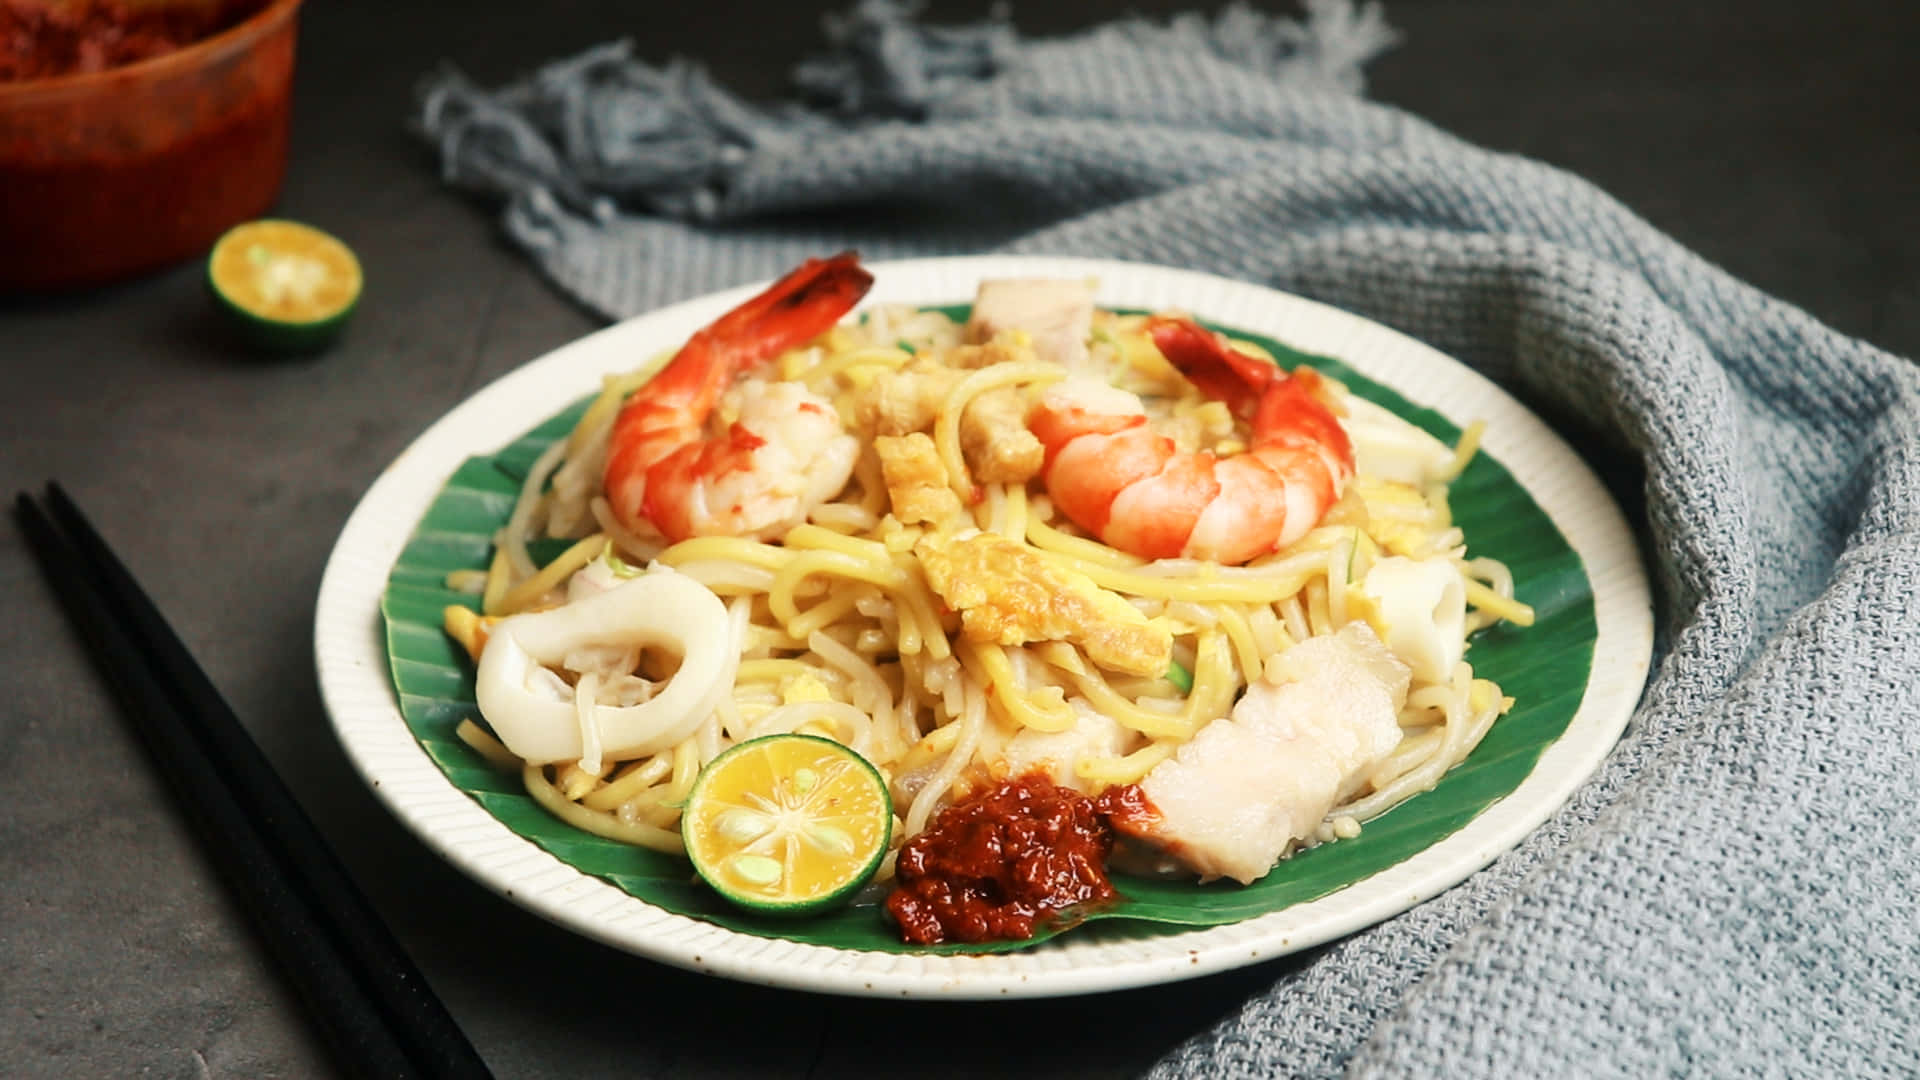 Hokkien Mee On Plate With Banana Leaf Picture